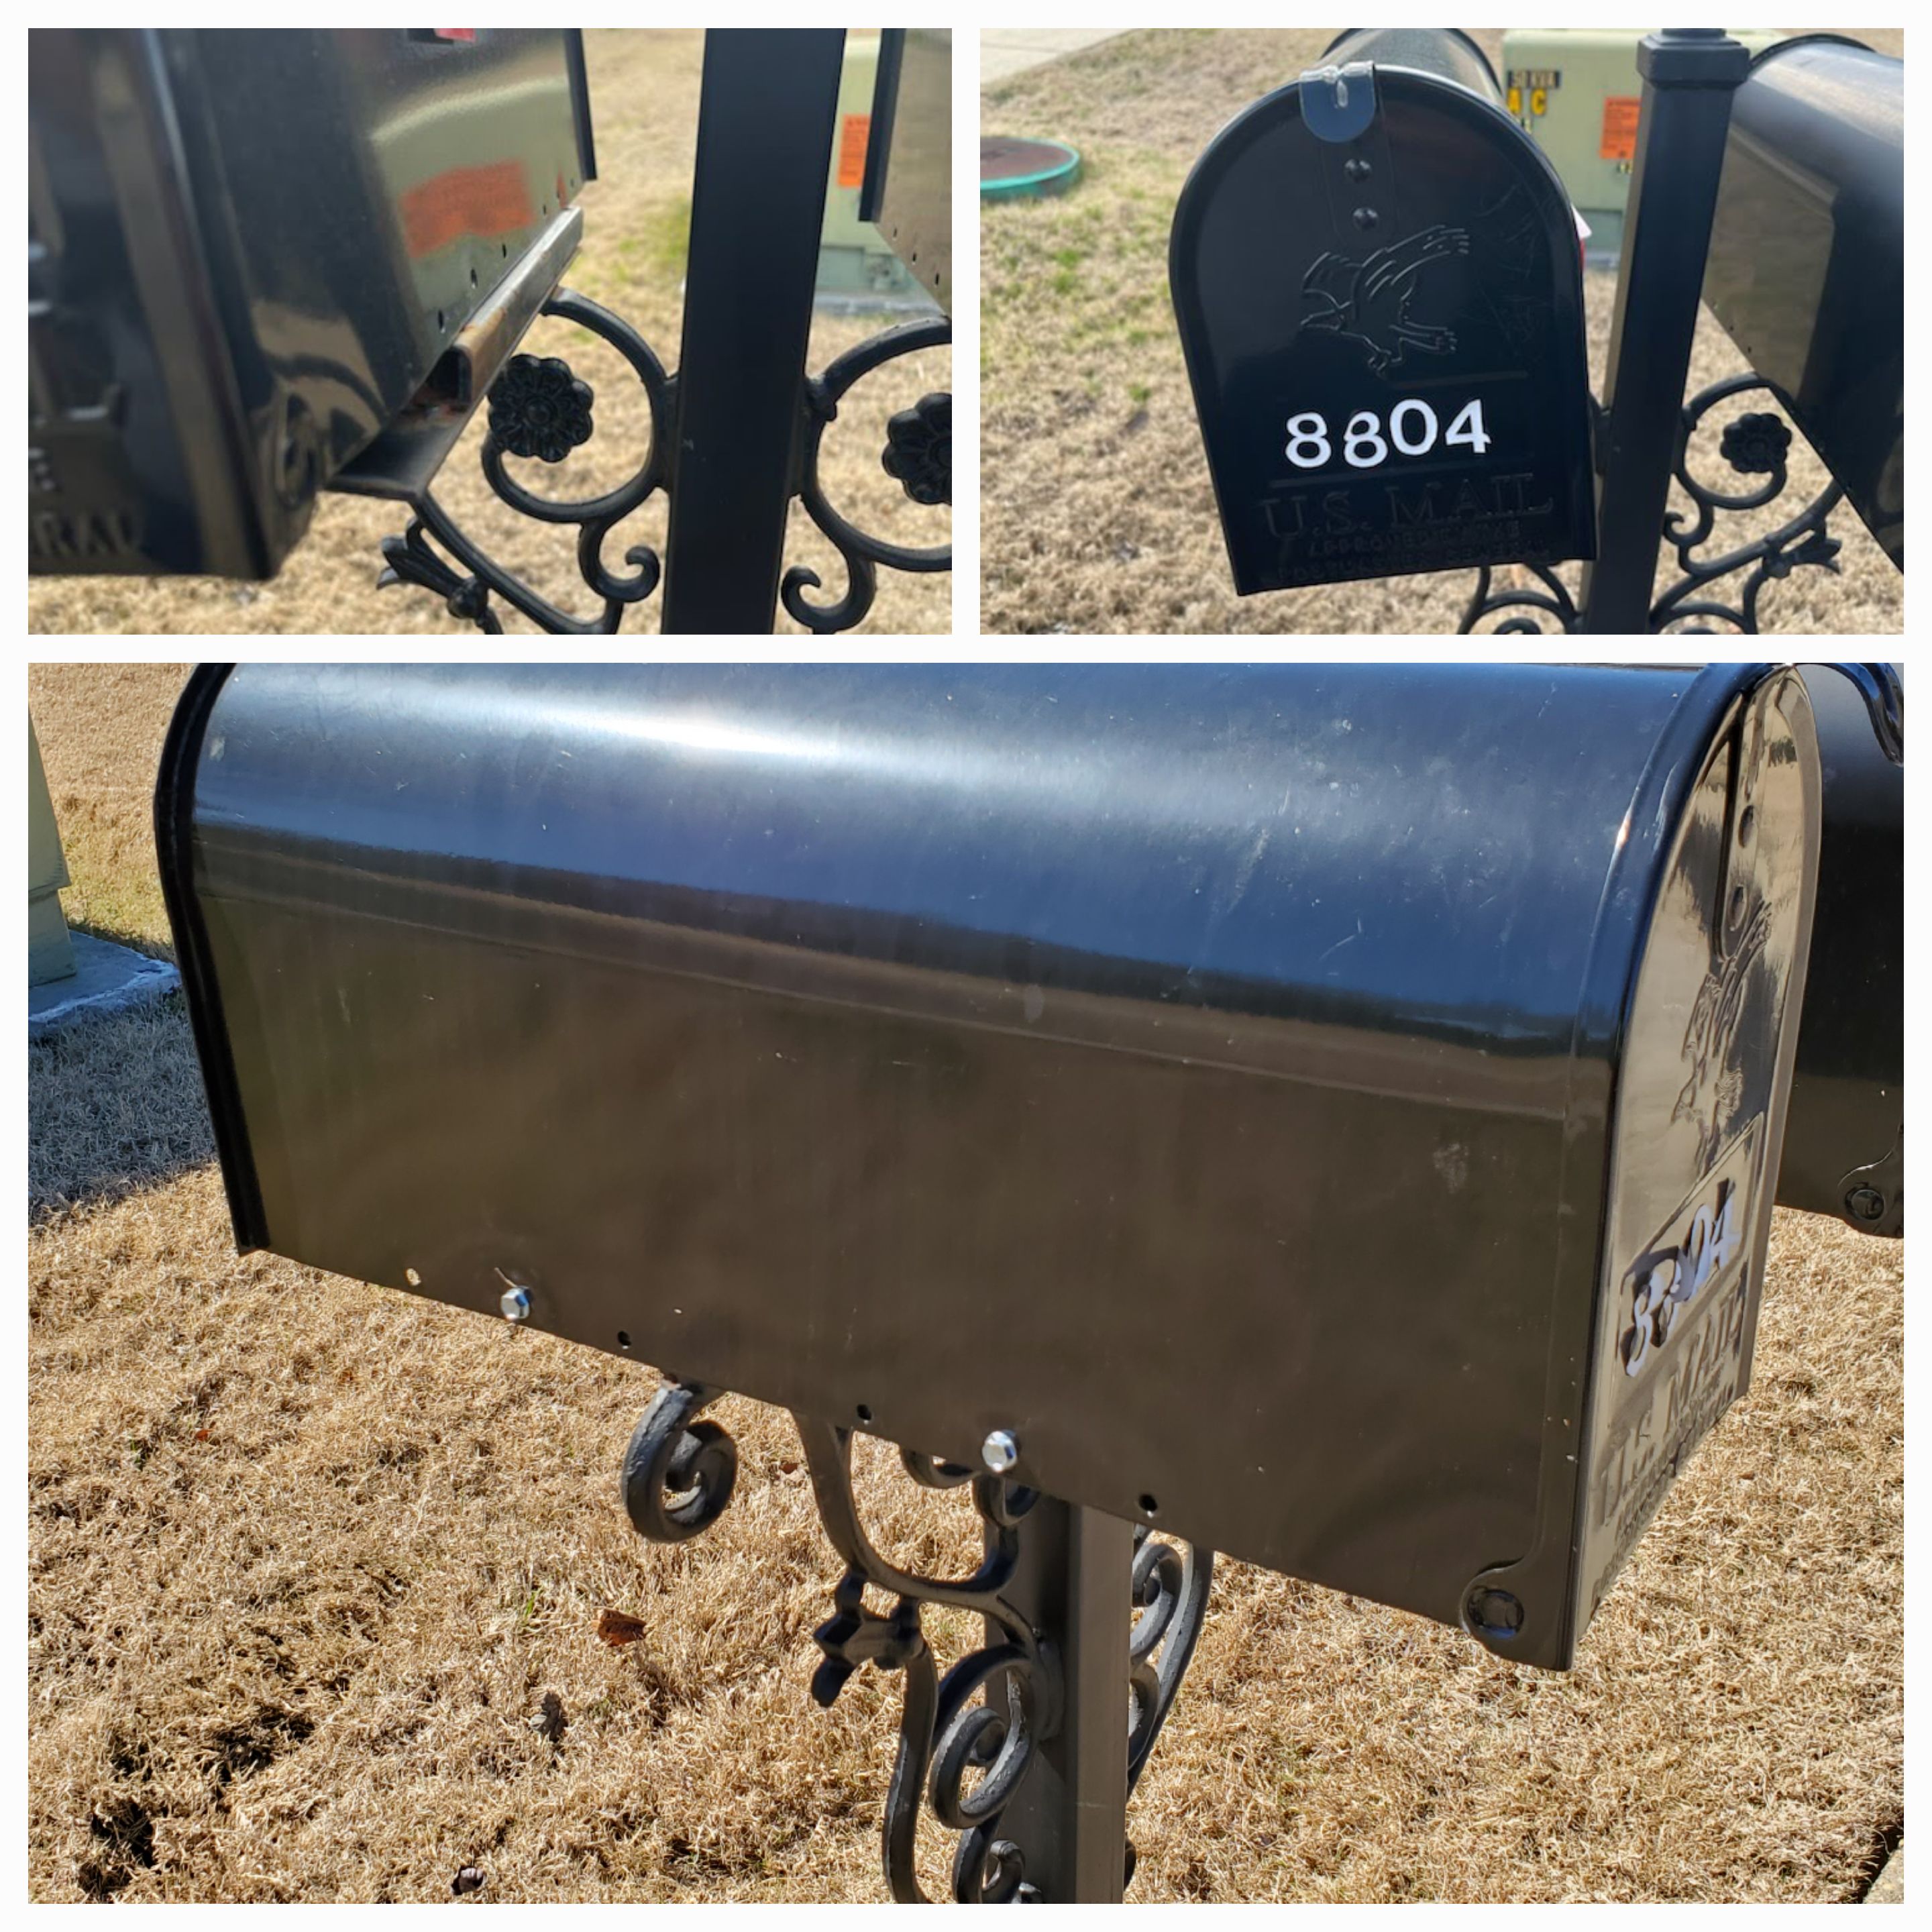 Mailbox was secured to the base